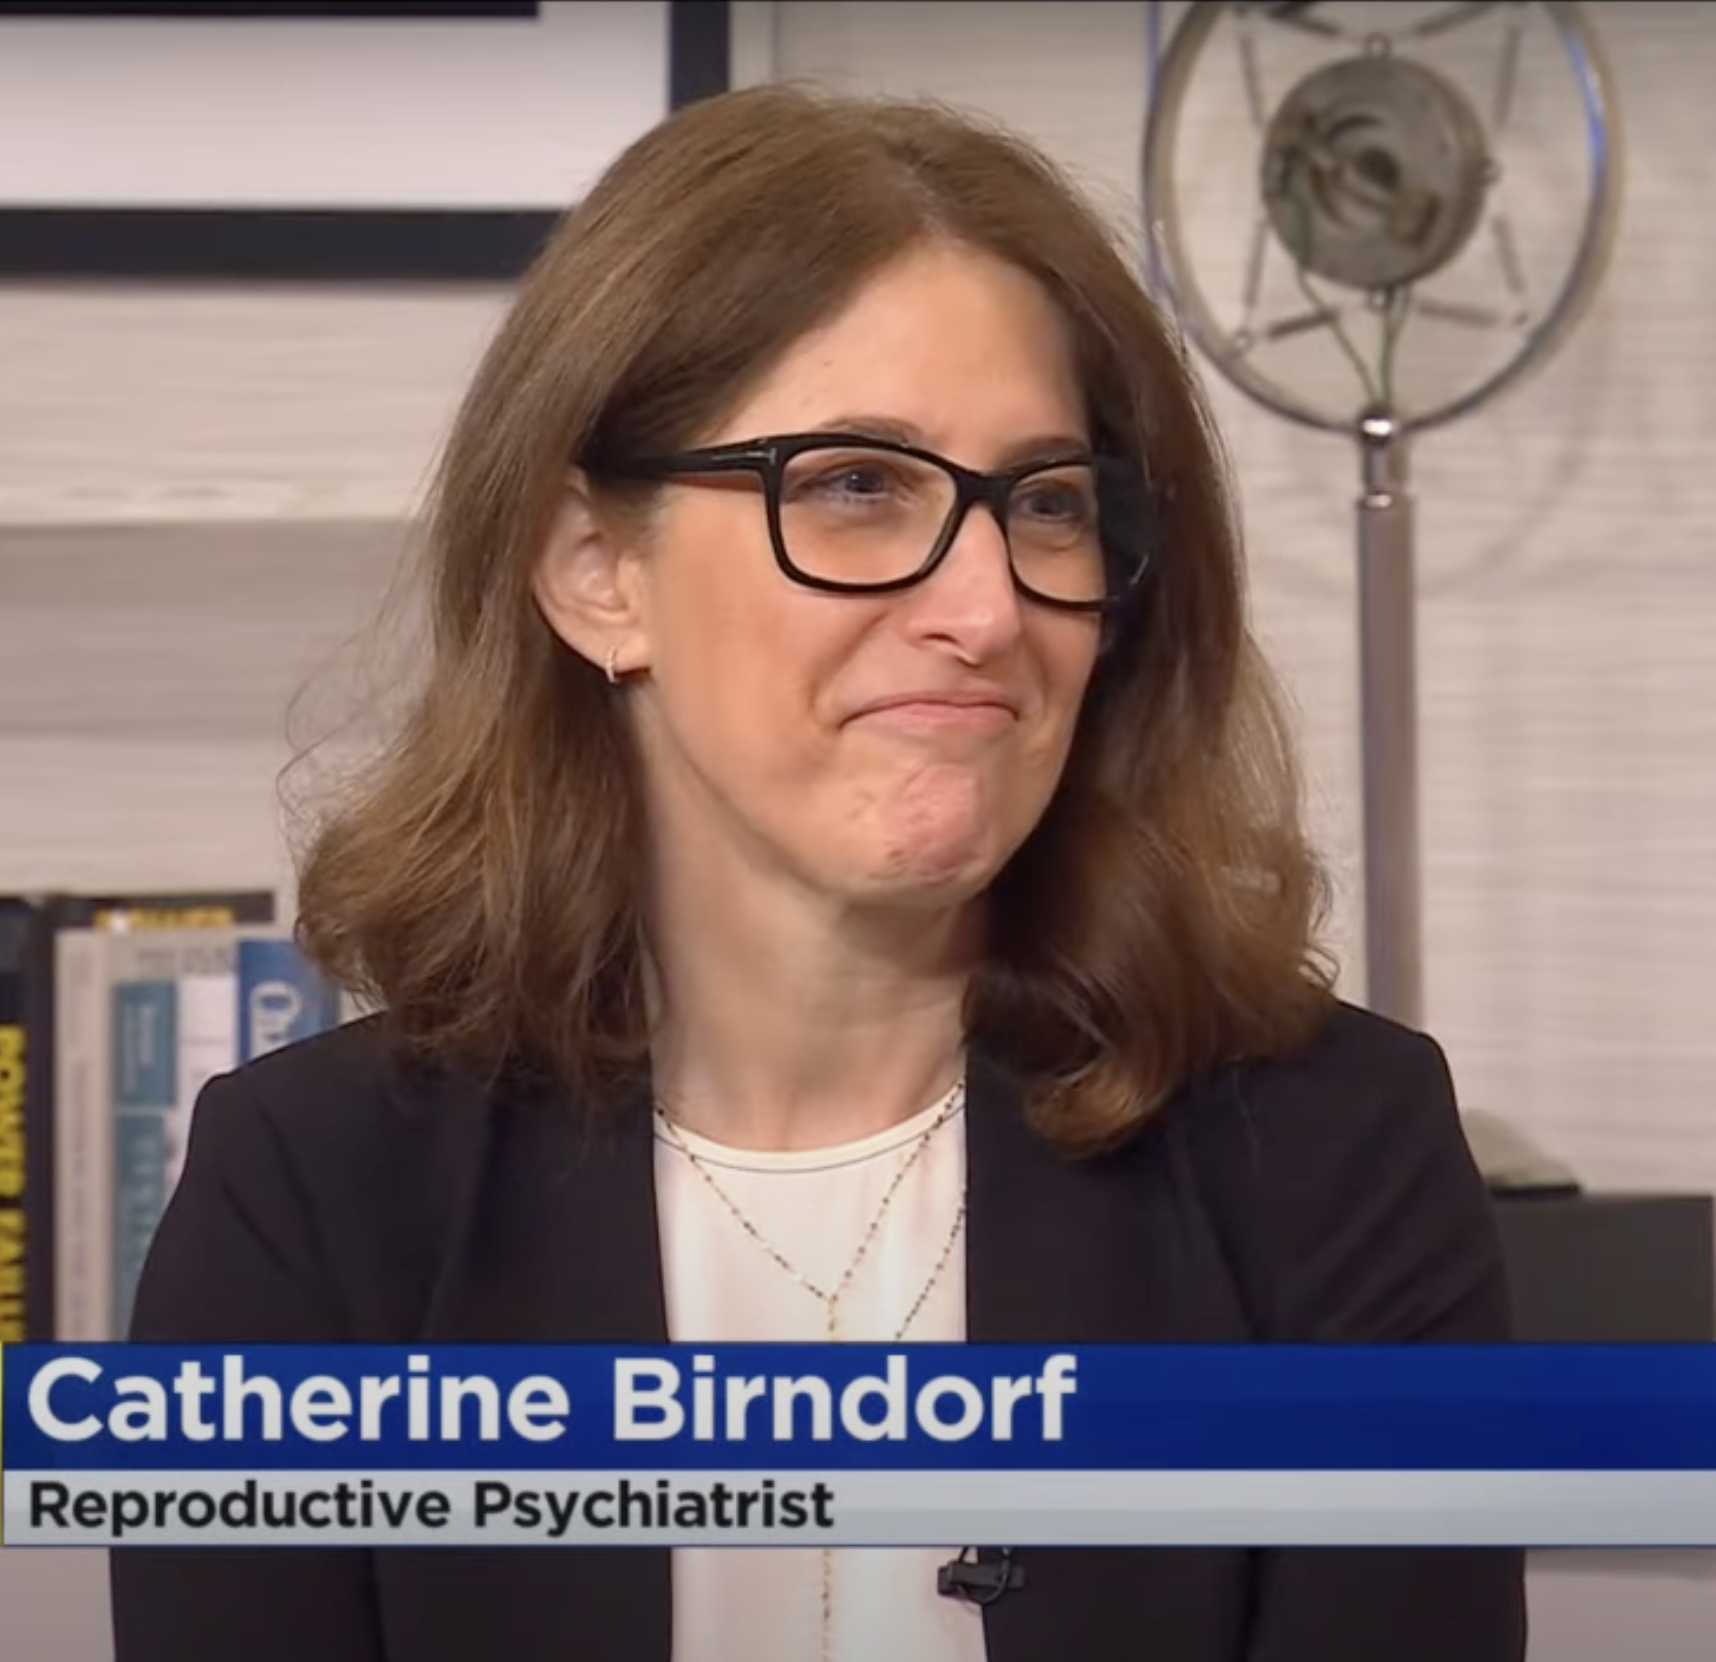 Photo of Dr. Catherine Birndorf on CBS New York discussing PMADs